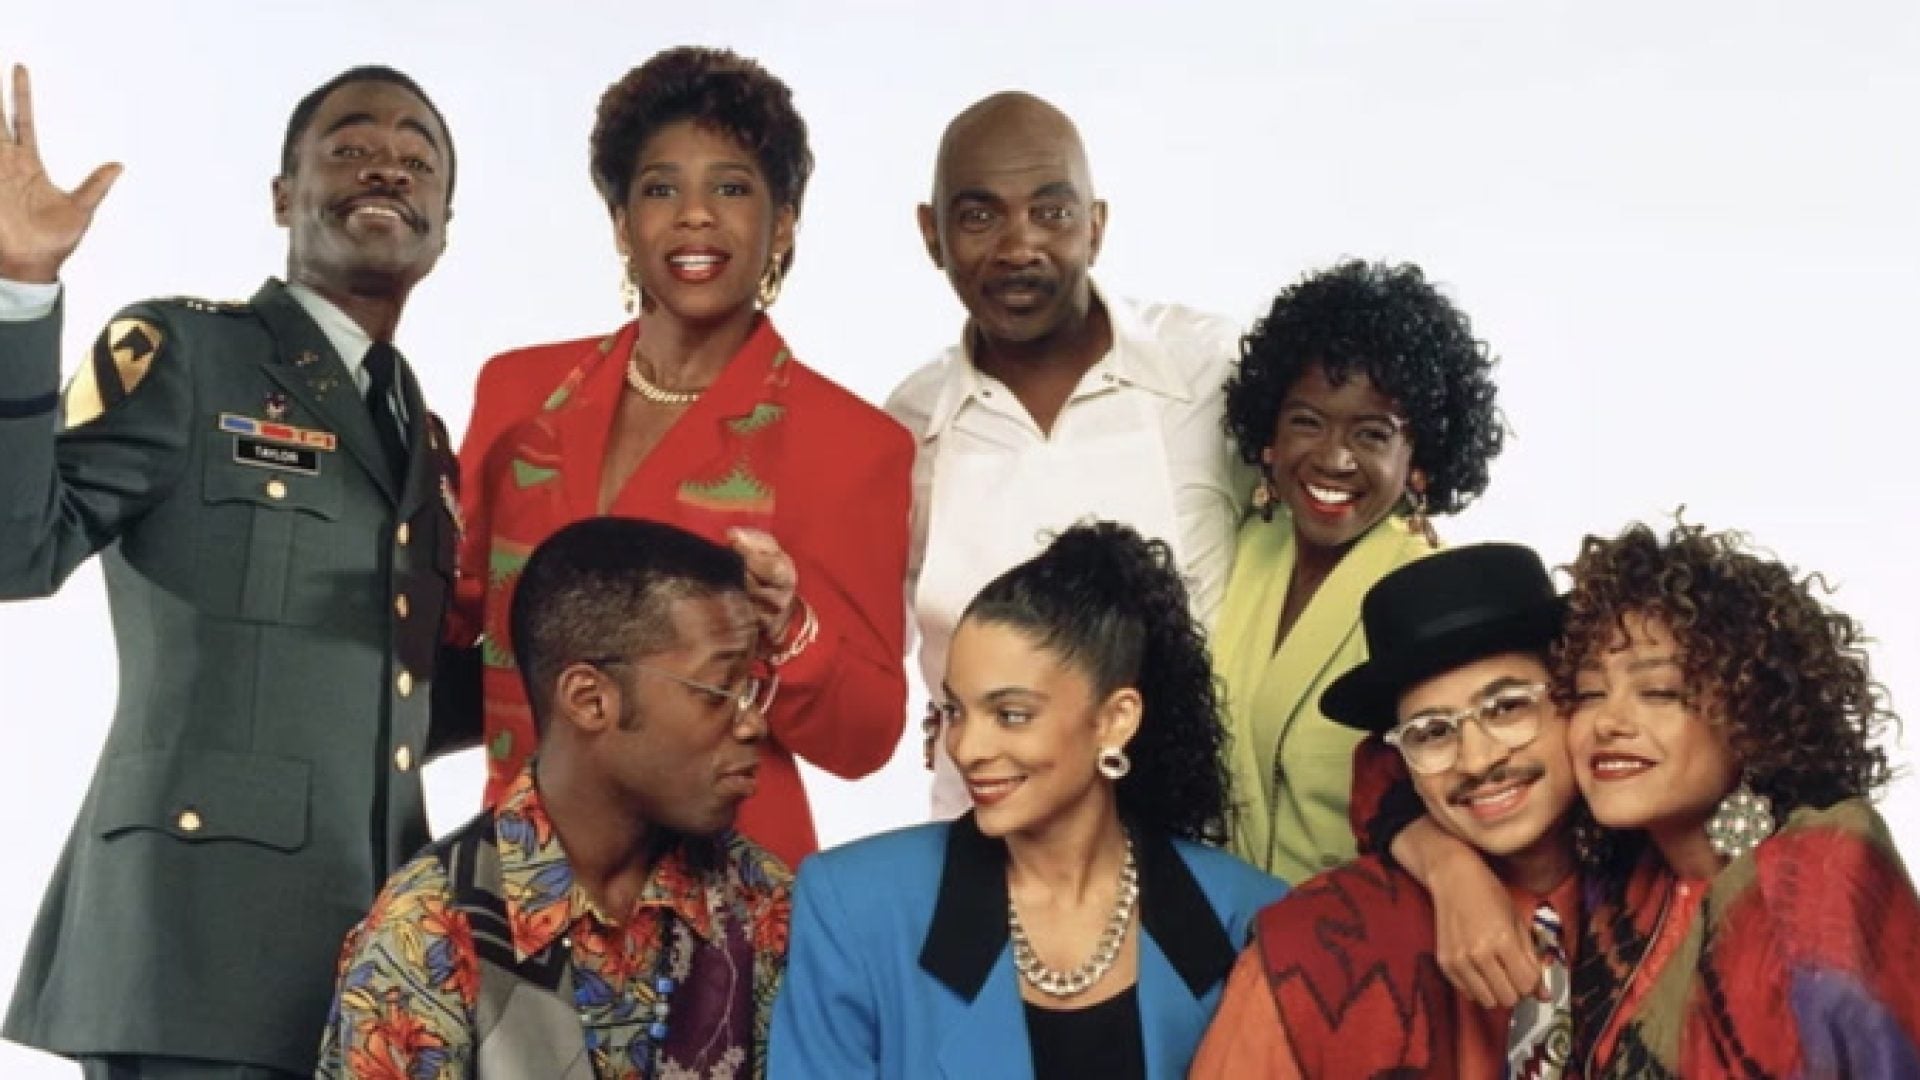 WATCH | The Cast Of A Different World 35 Years Later